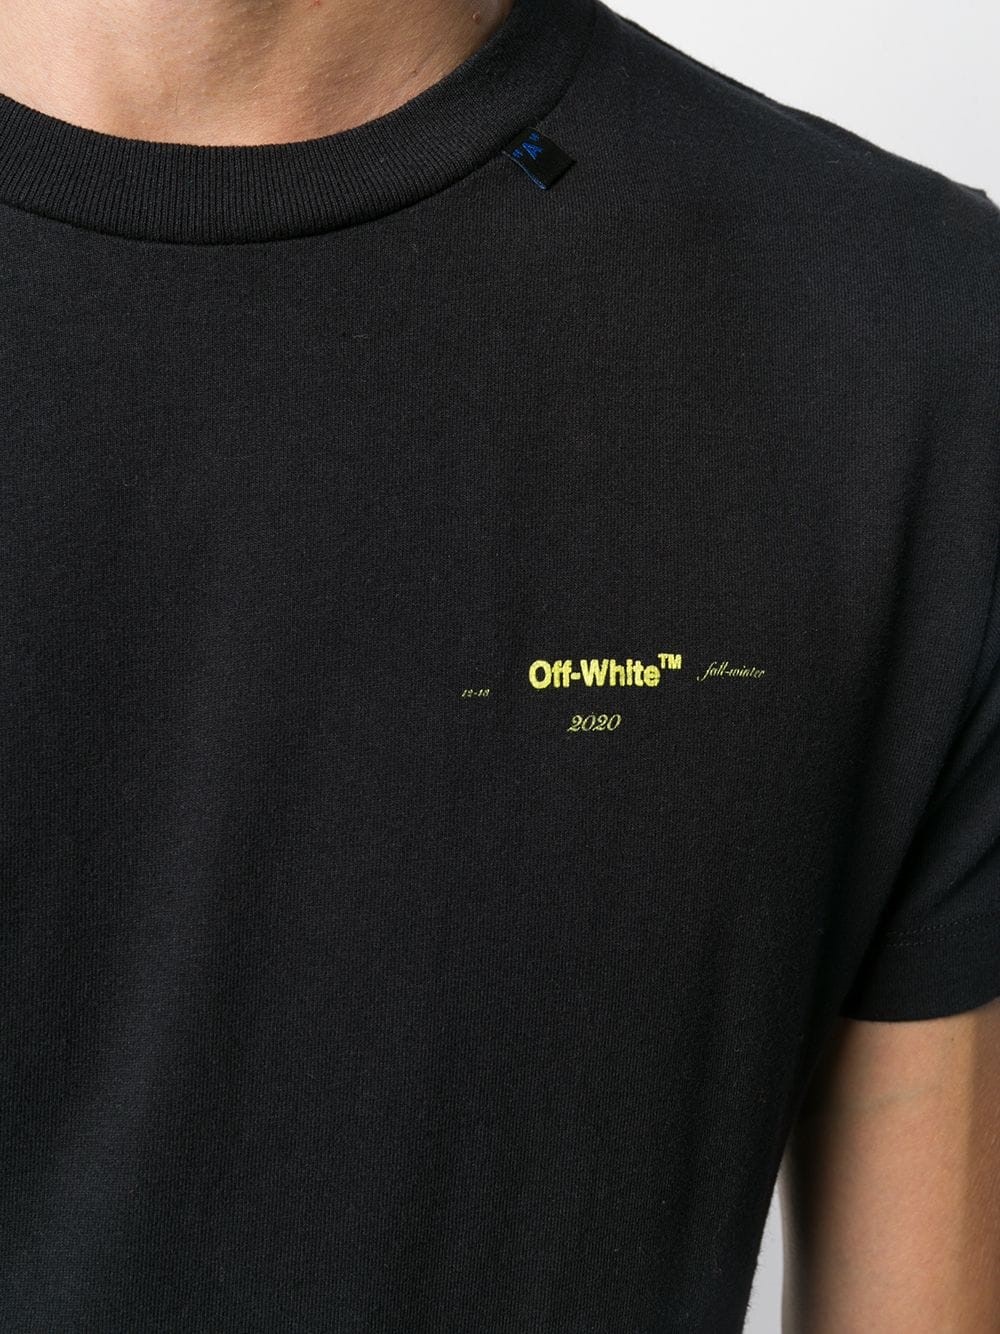 off-white ARROWS T-SHIRT available on montiboutique.com - 30643